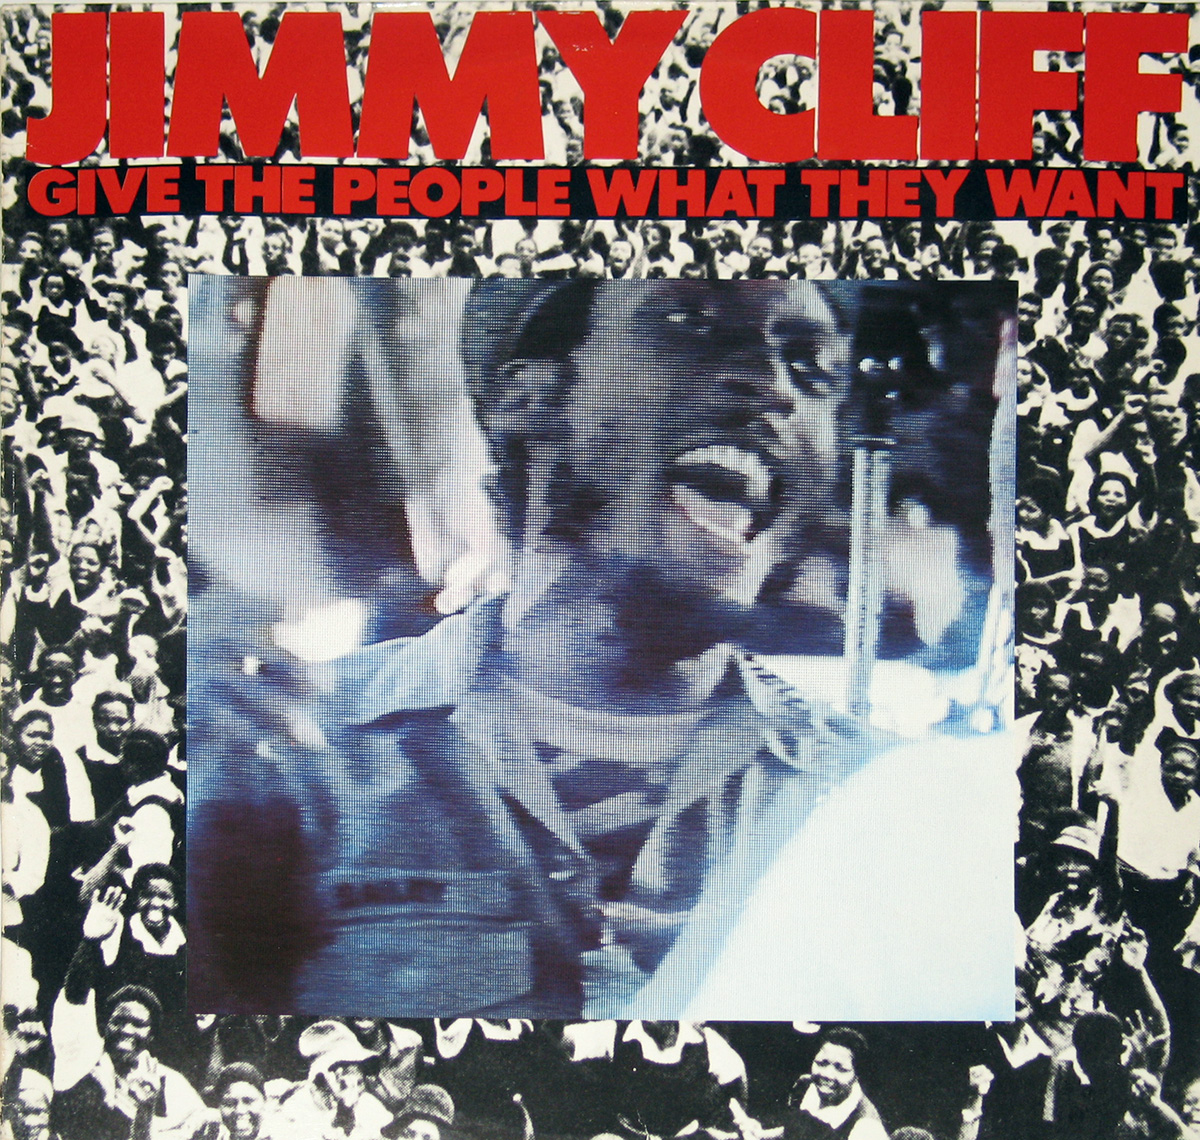 Jimmy Cliff Give the People what they want